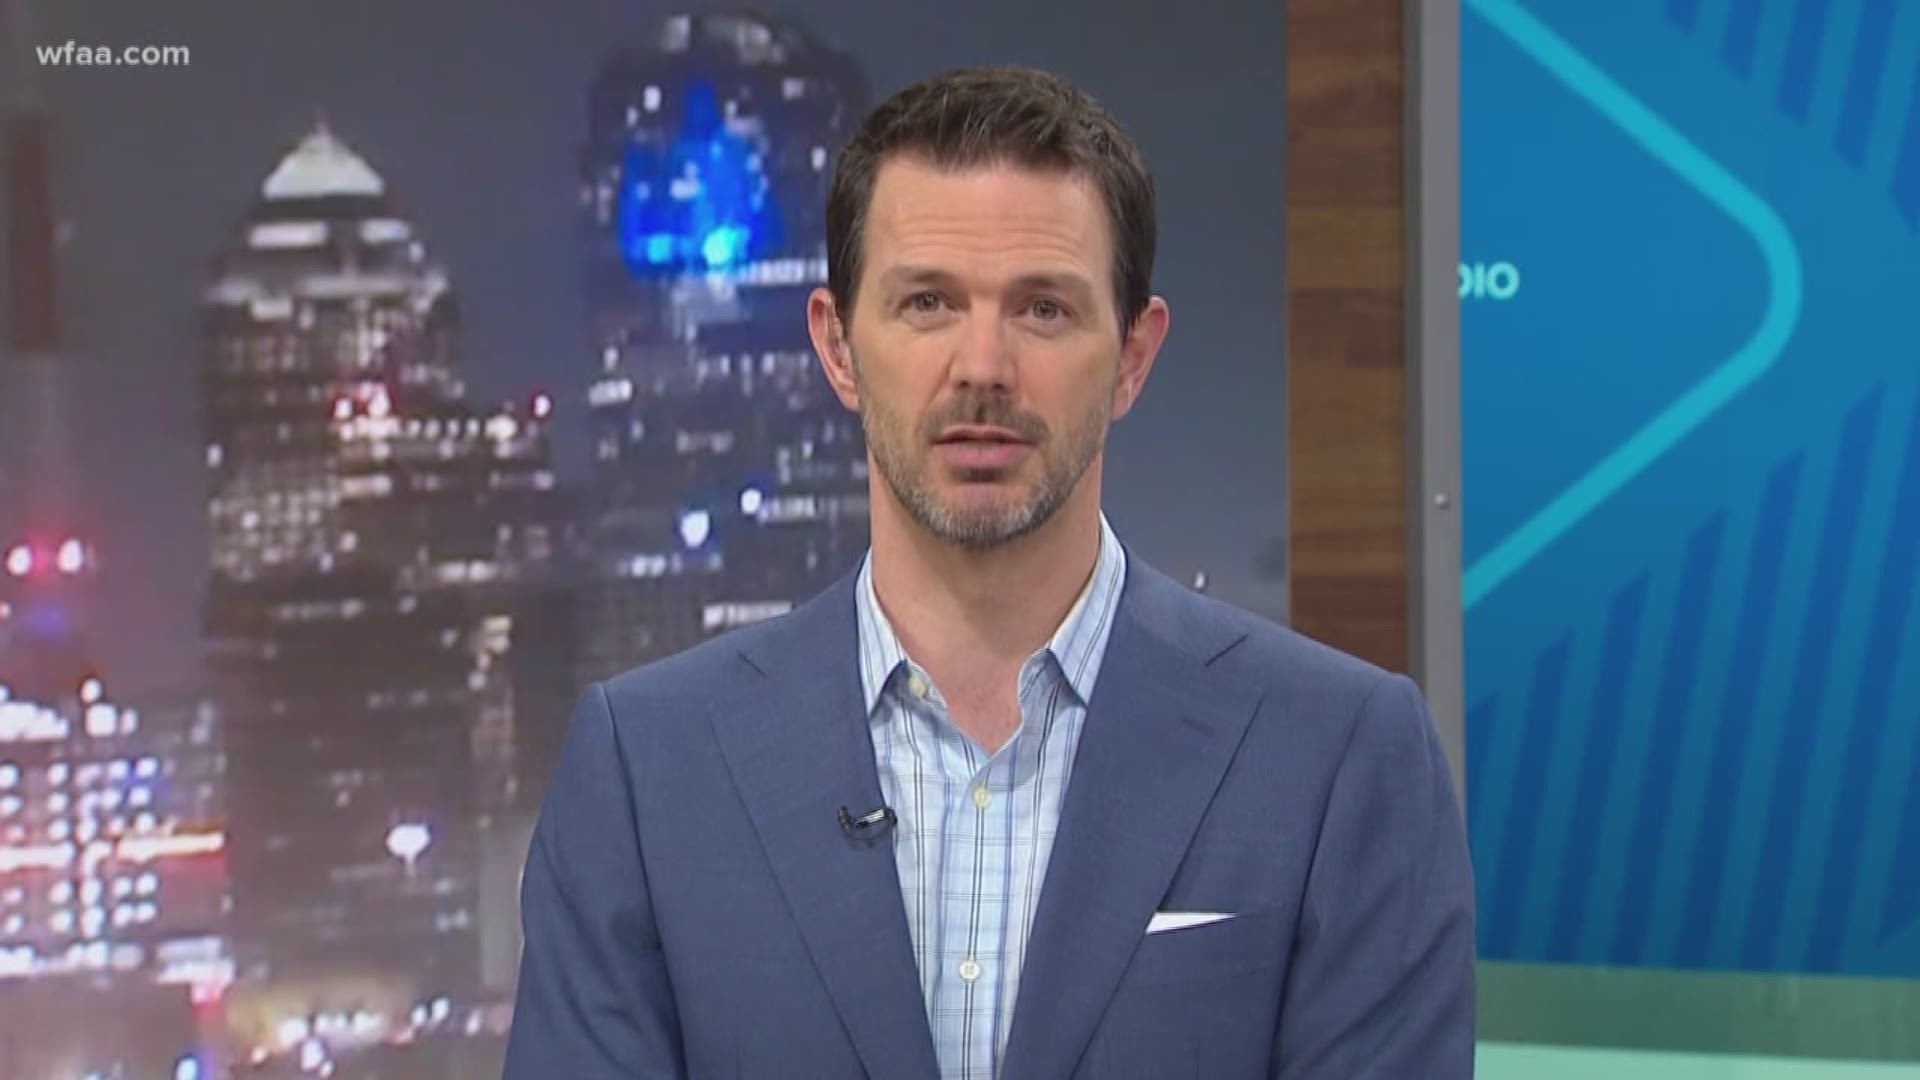 WFAA's Marc Istook reminds viewers of the approaching deadline to buy health insurance for 2020. Plus, how childhood obesity could affect brain structure.